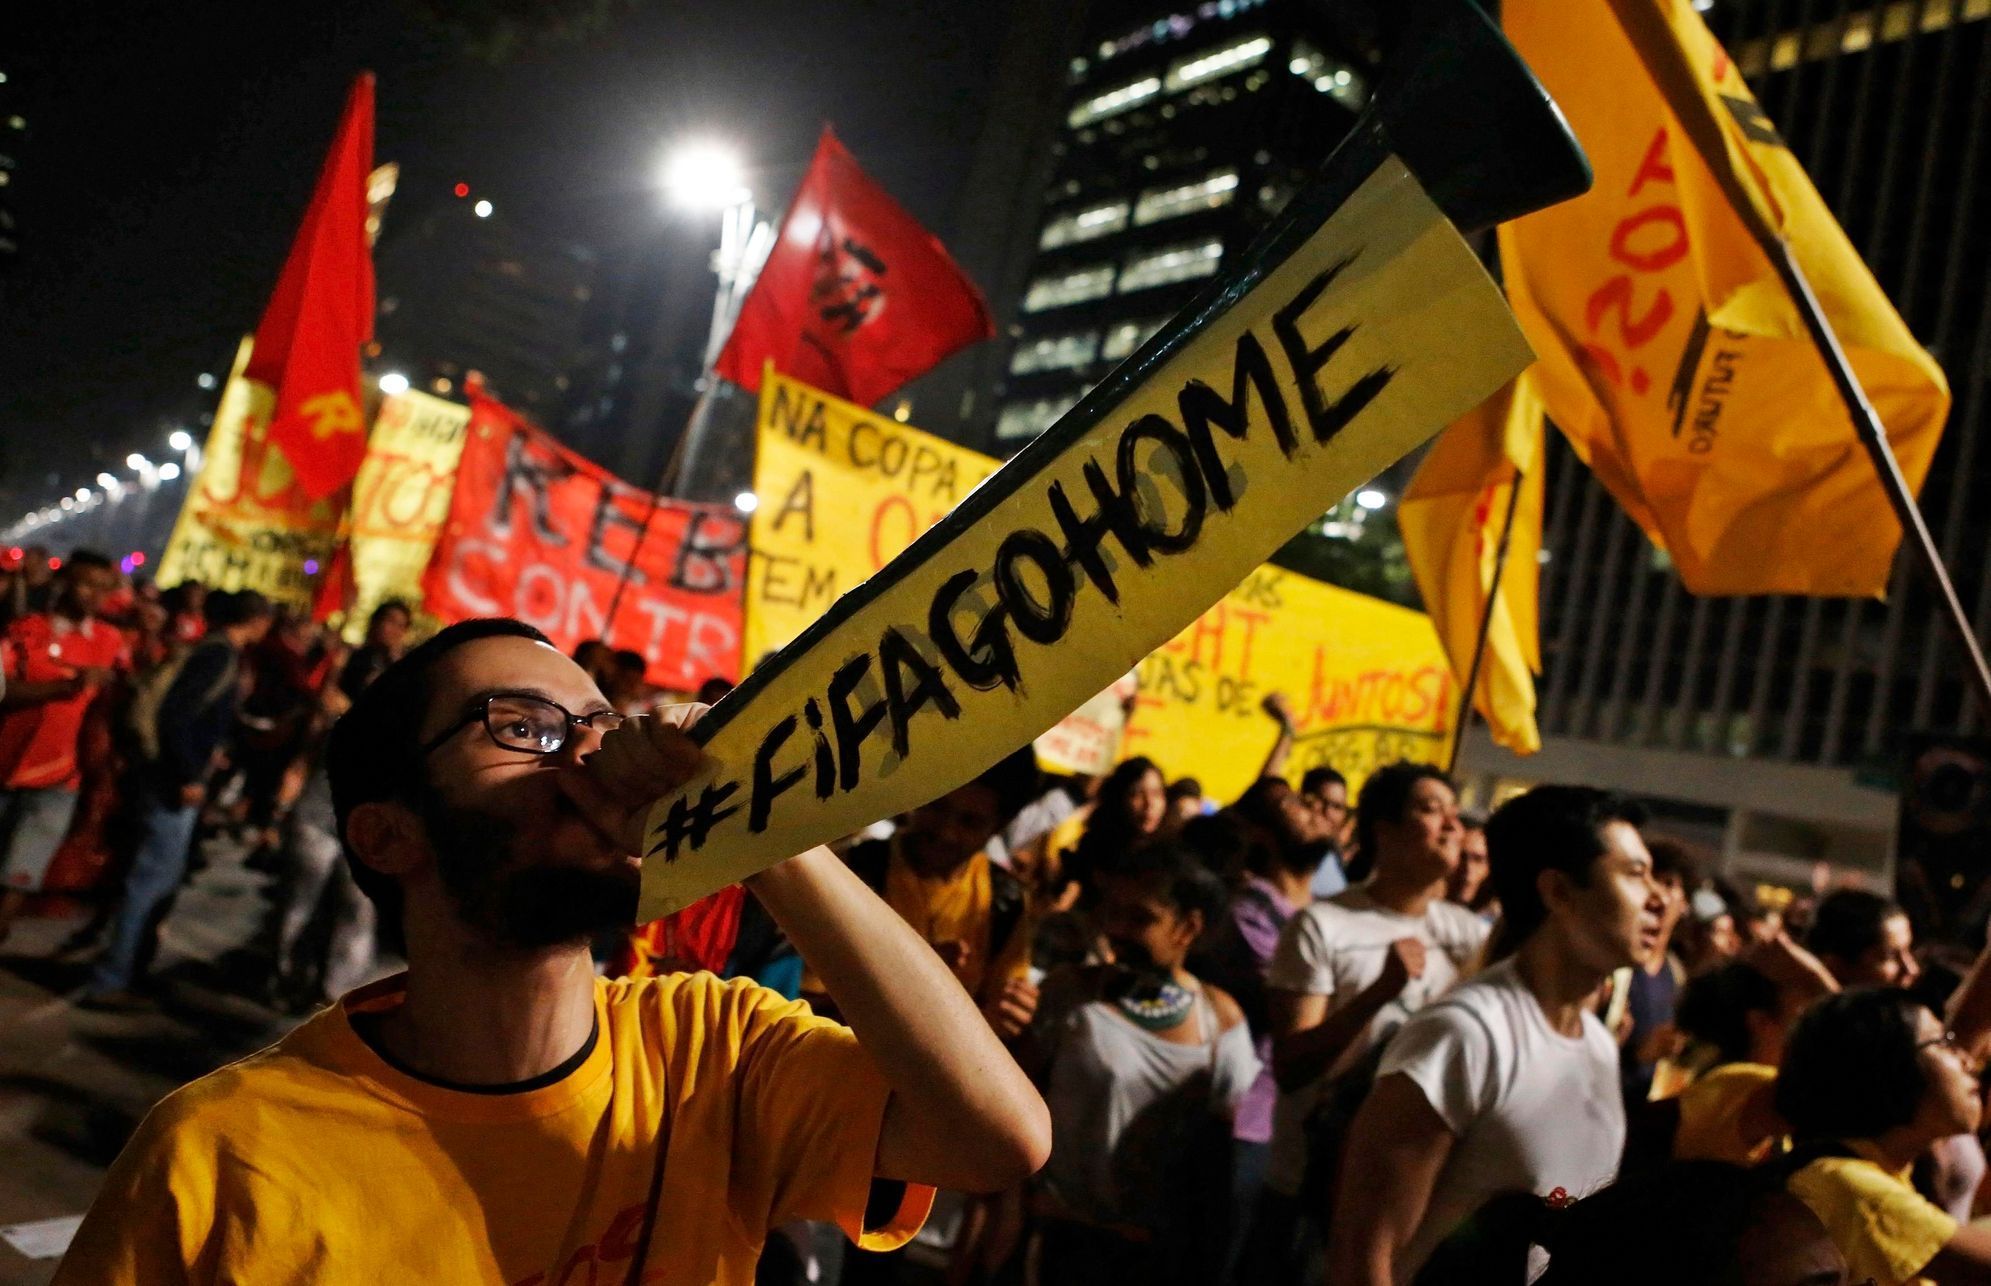 A demonstrator blows a horn during a protest against the 2014 World Cup, in Sao Paulo